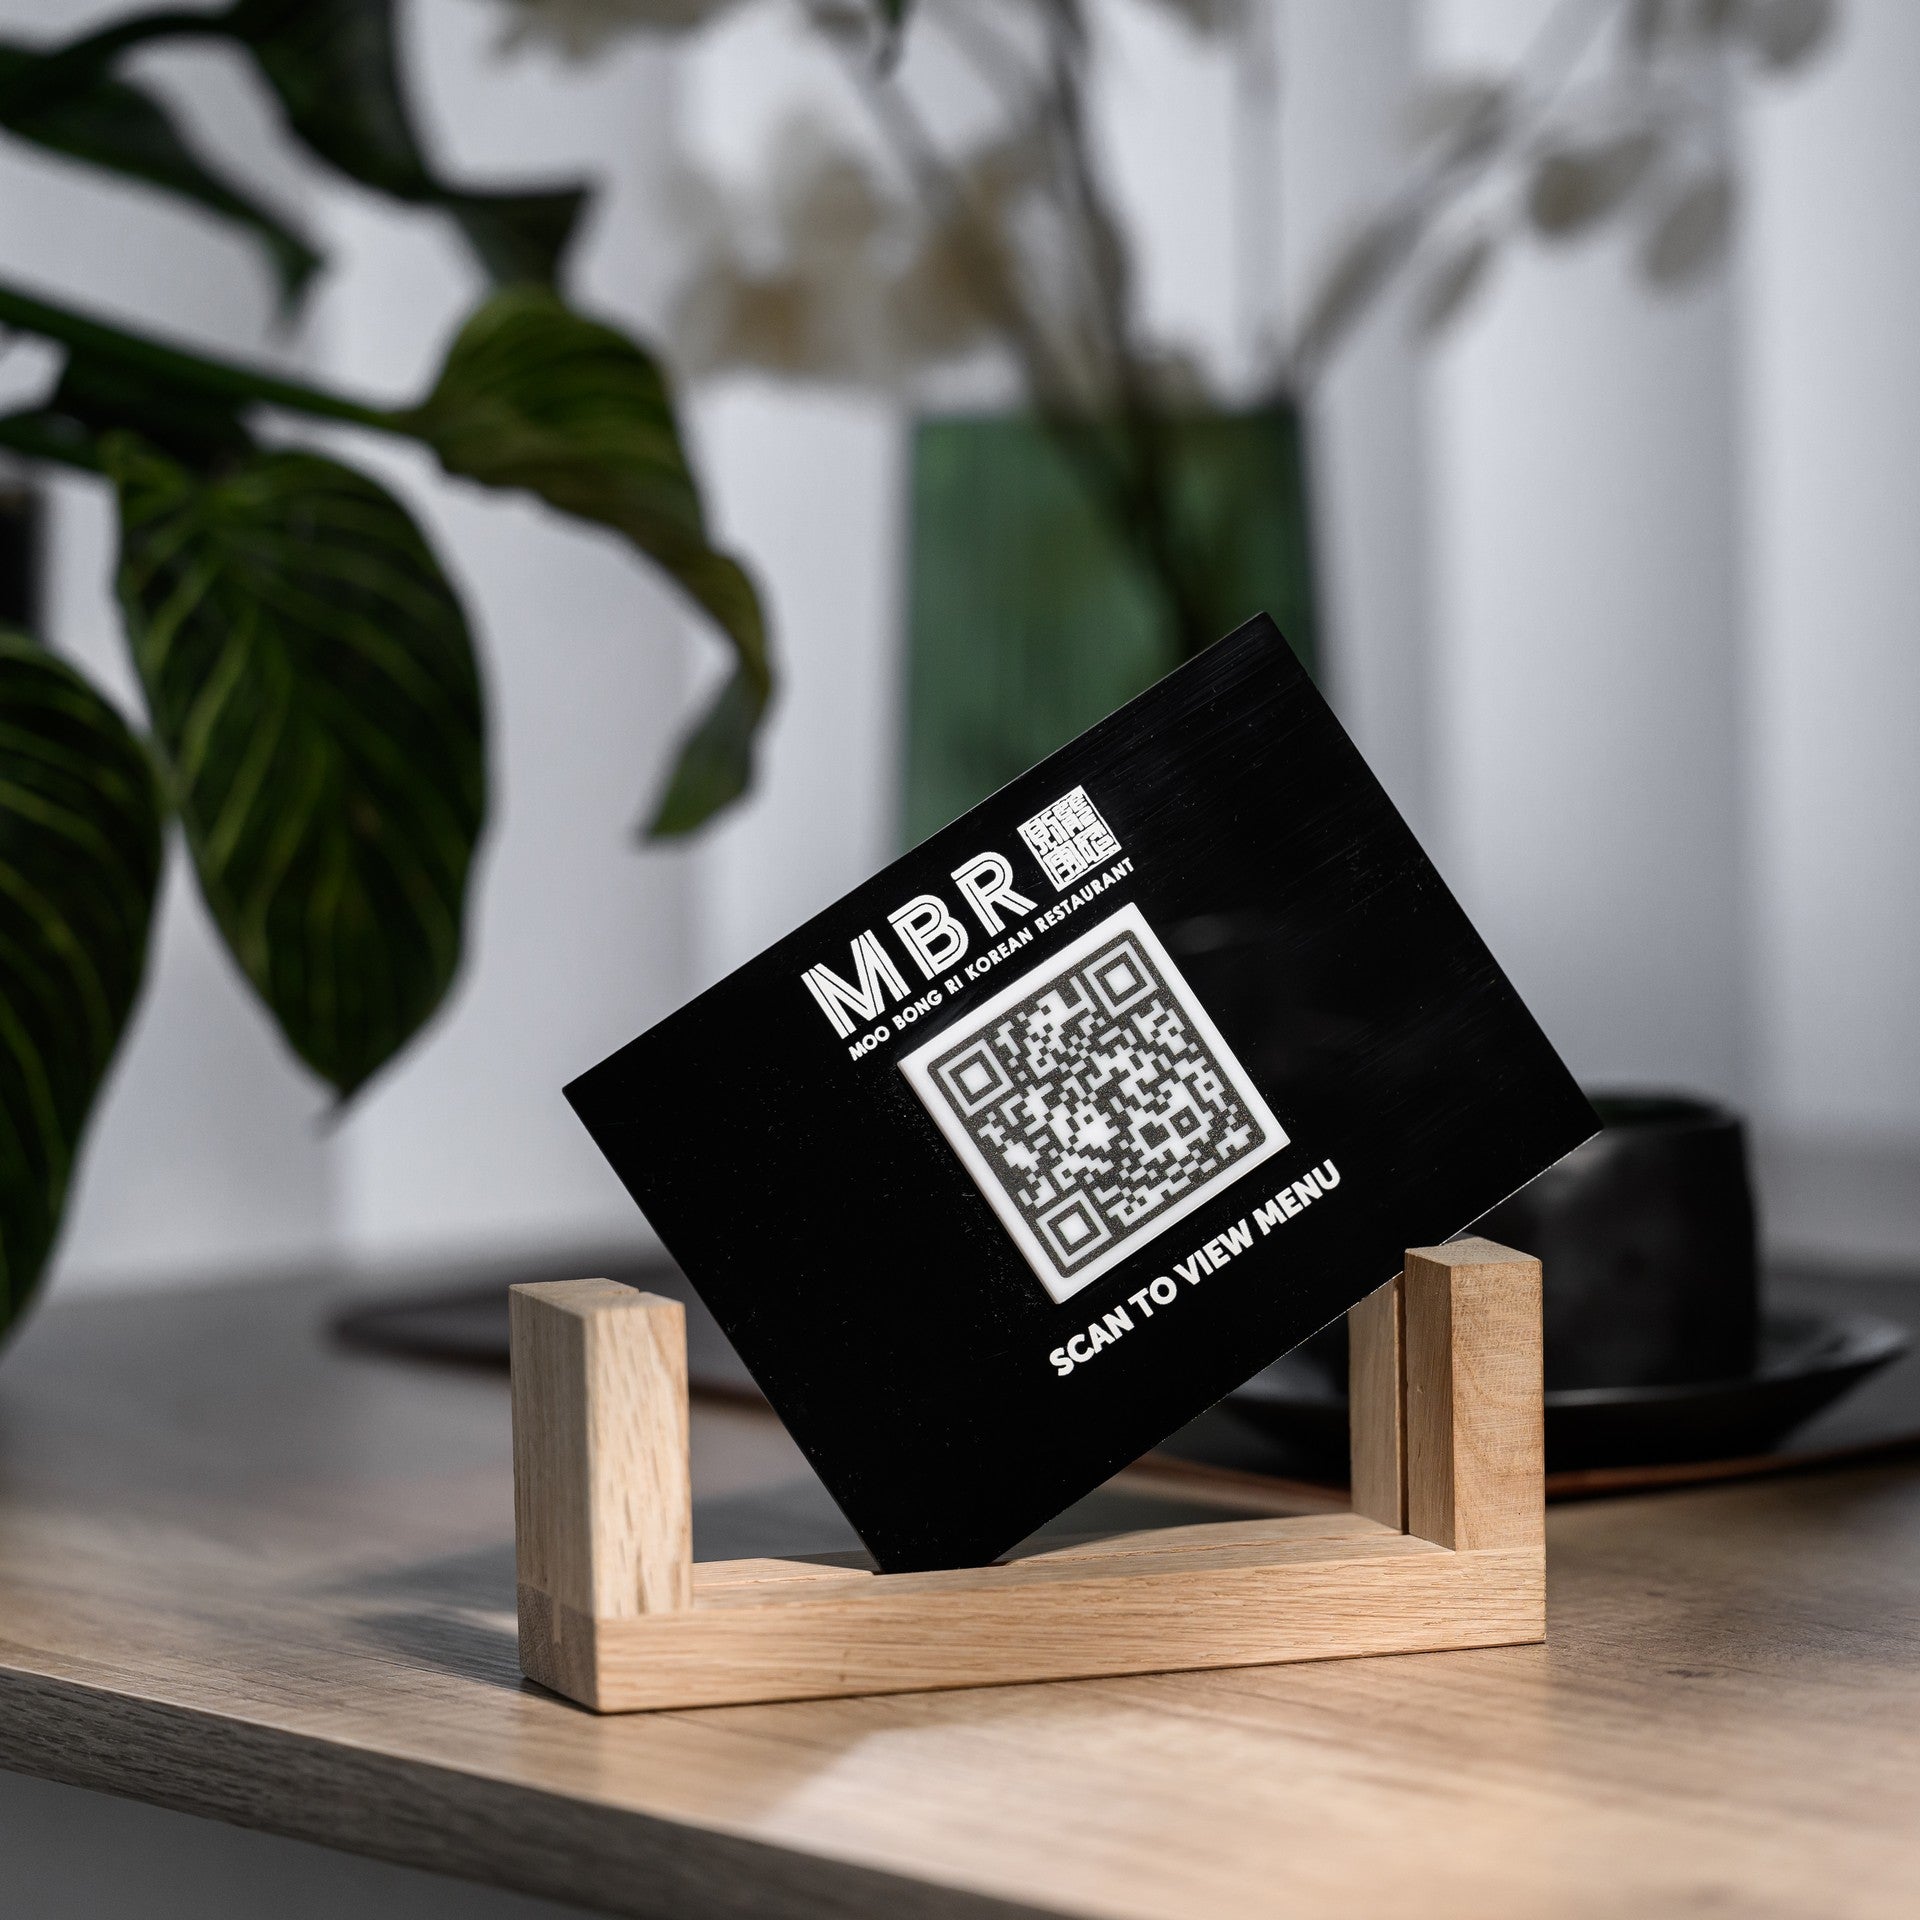 Acrylic QR Menu Display with Wooden Stand